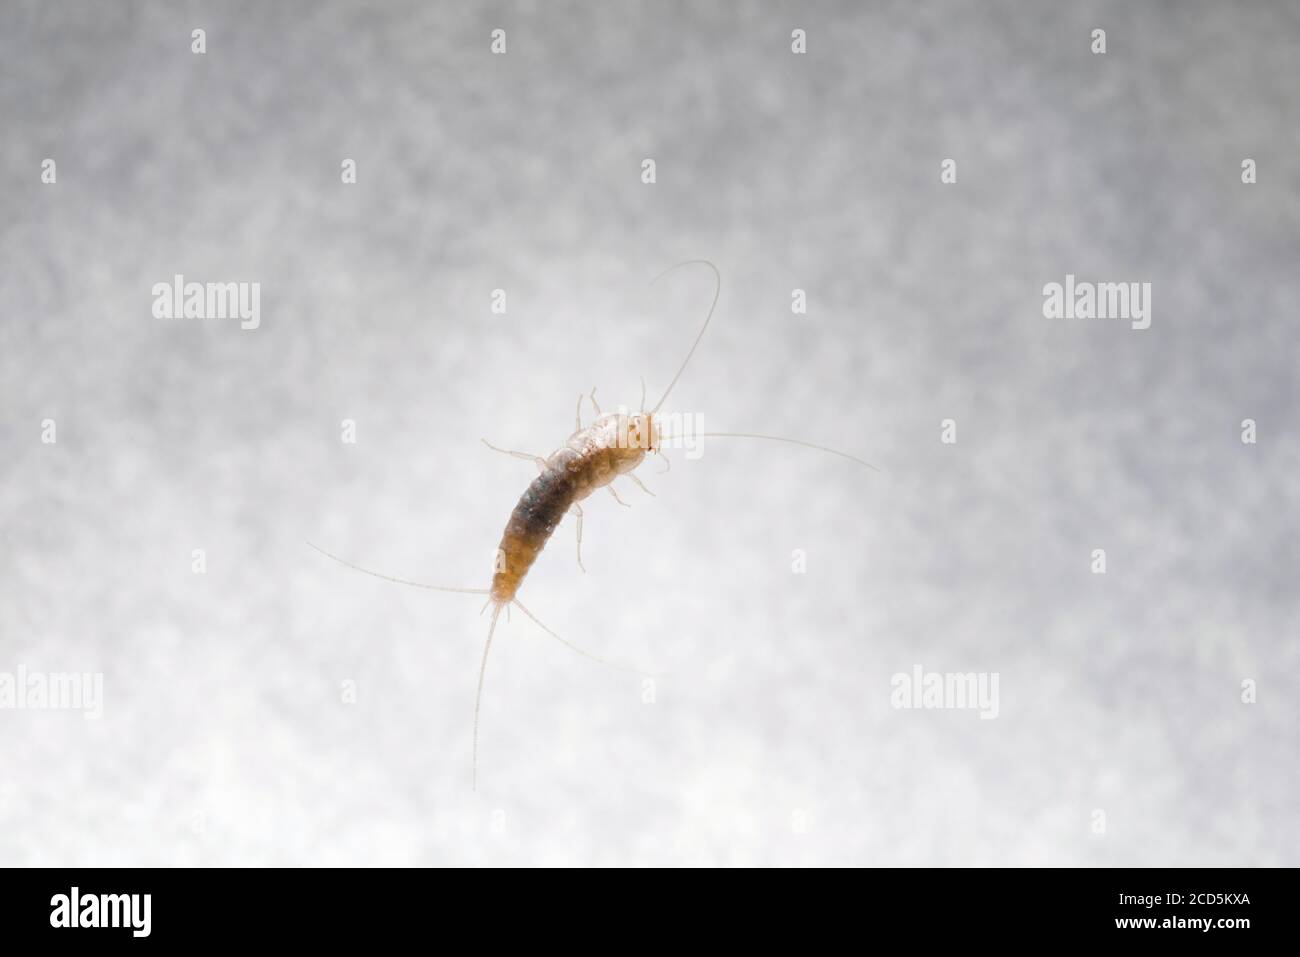 Firebrat (Thermobia domestica), a species of silverfish. Insect Lepisma saccharina in normal habitat. Stock Photo